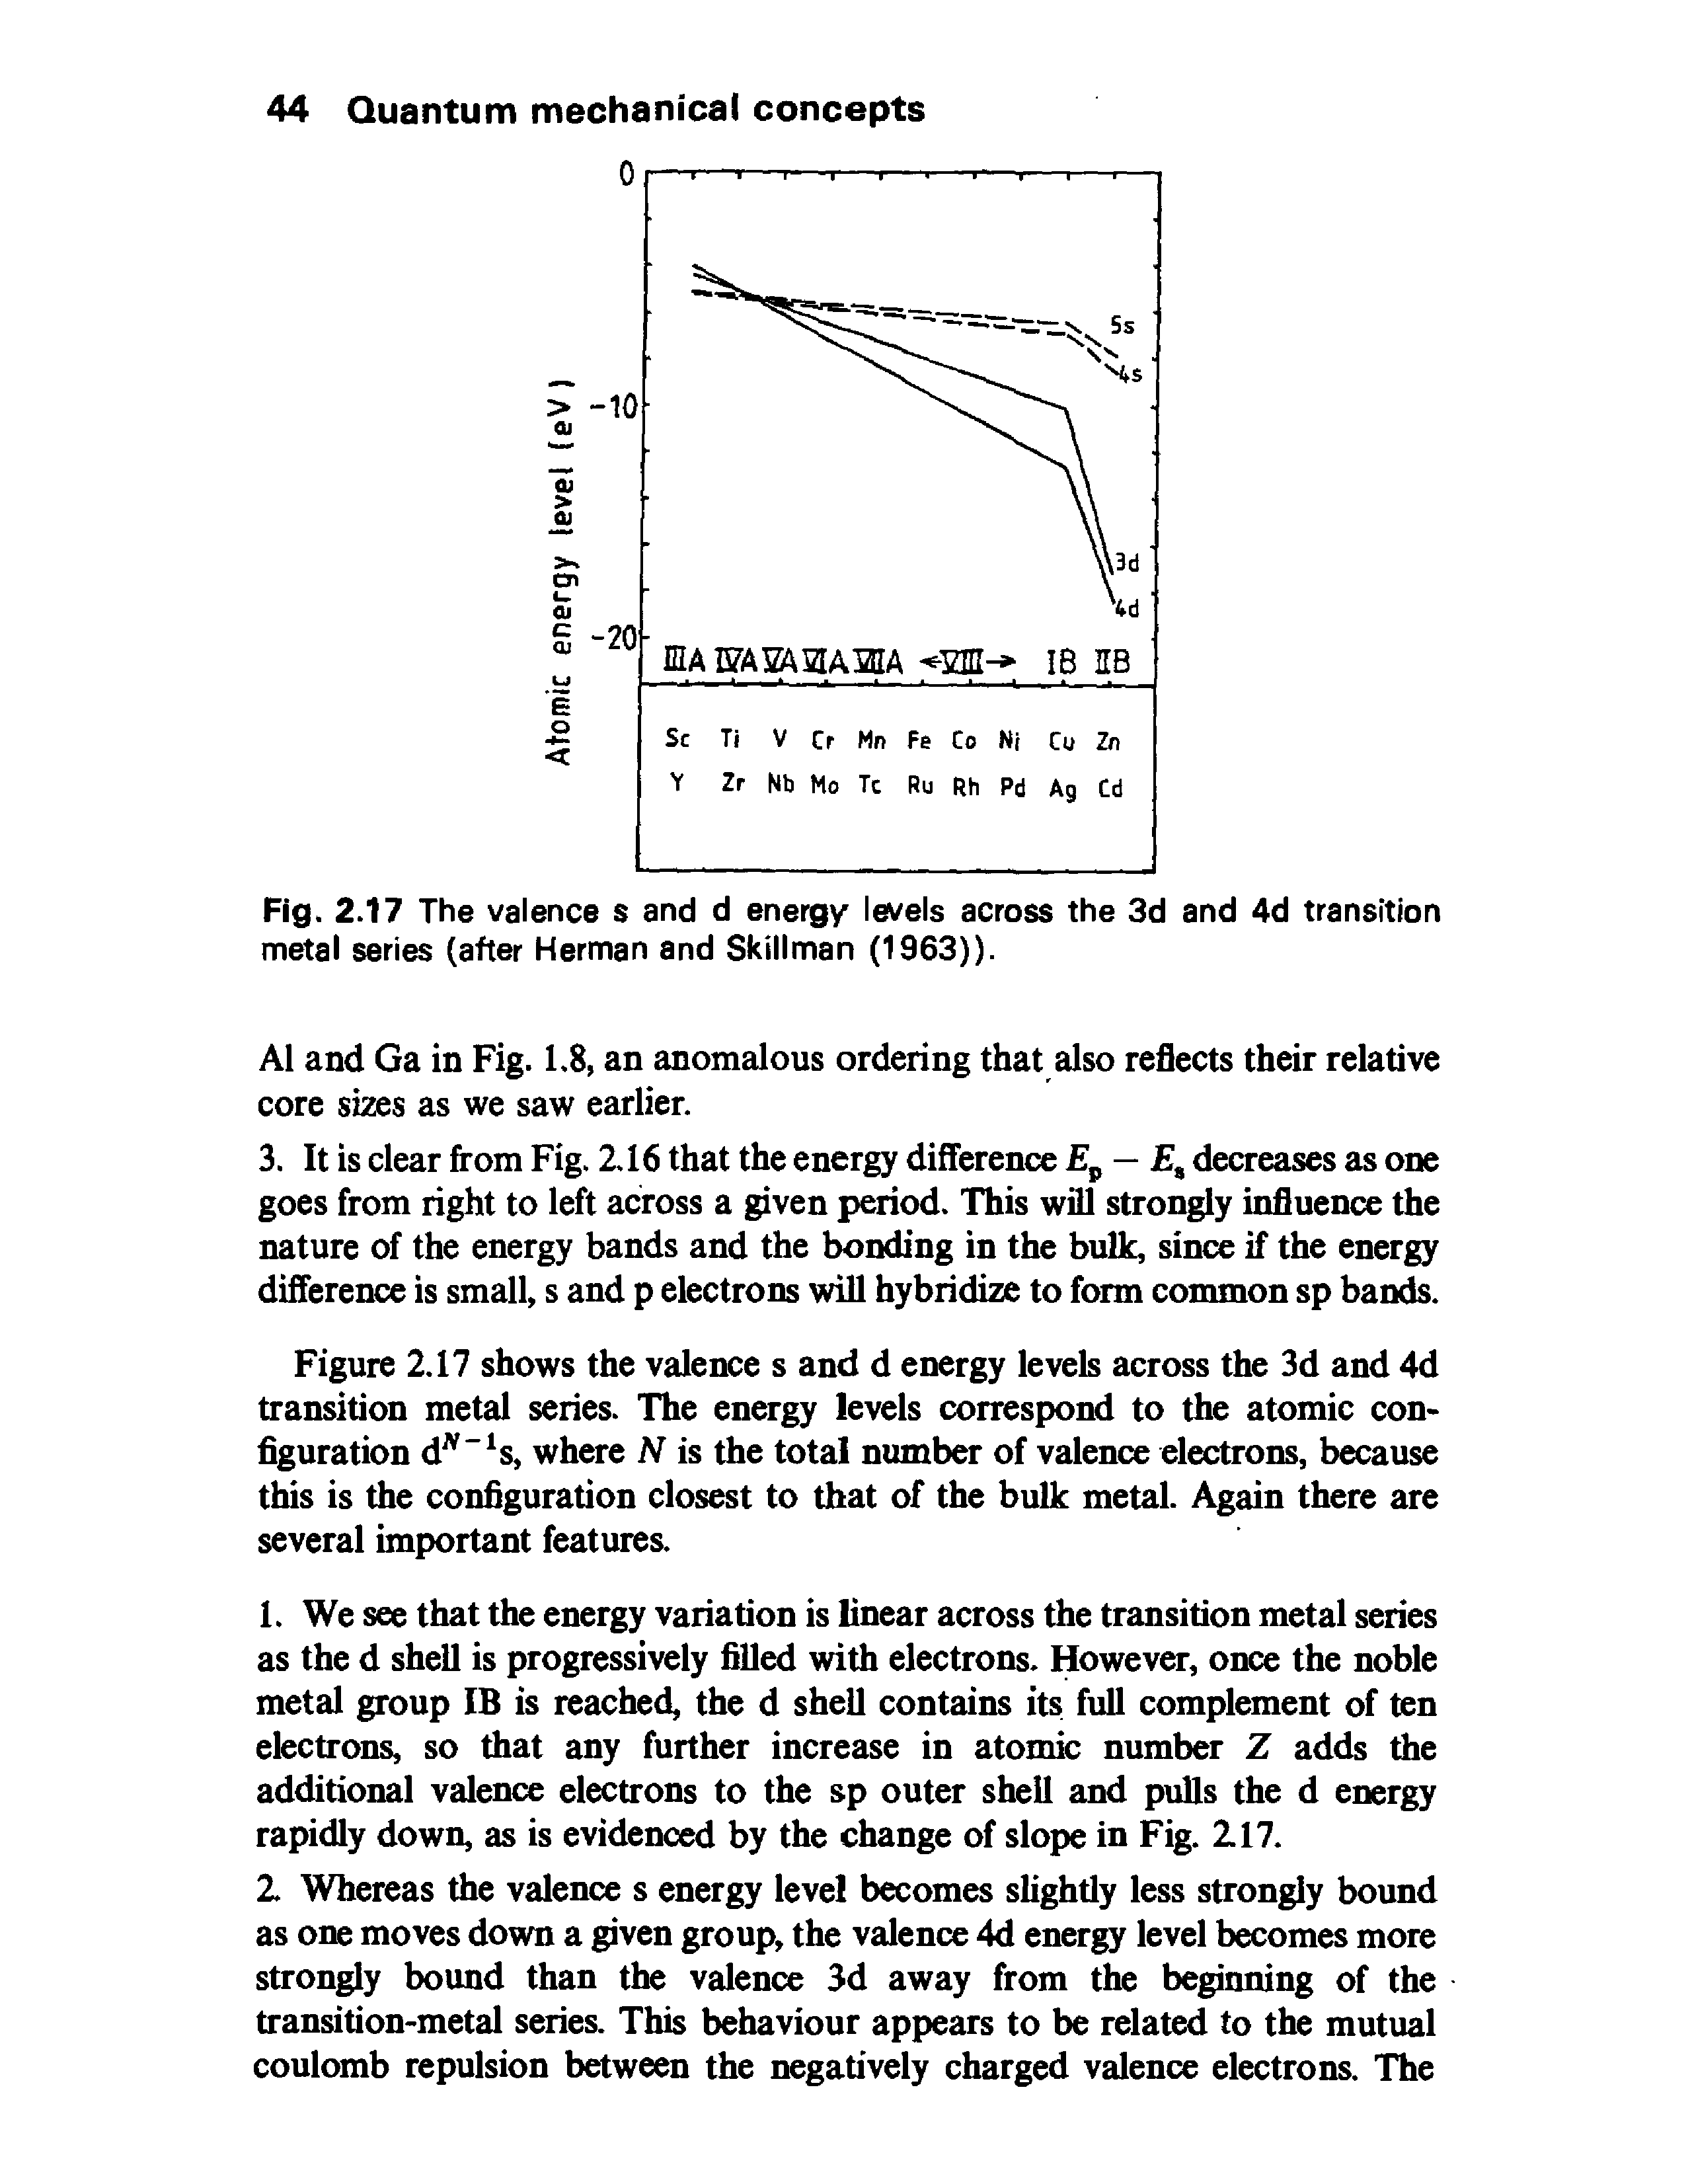 Fig. 2.17 The valence s and d energy levels across the 3d and 4d transition metal series (after Herman and Skillman (1963)).